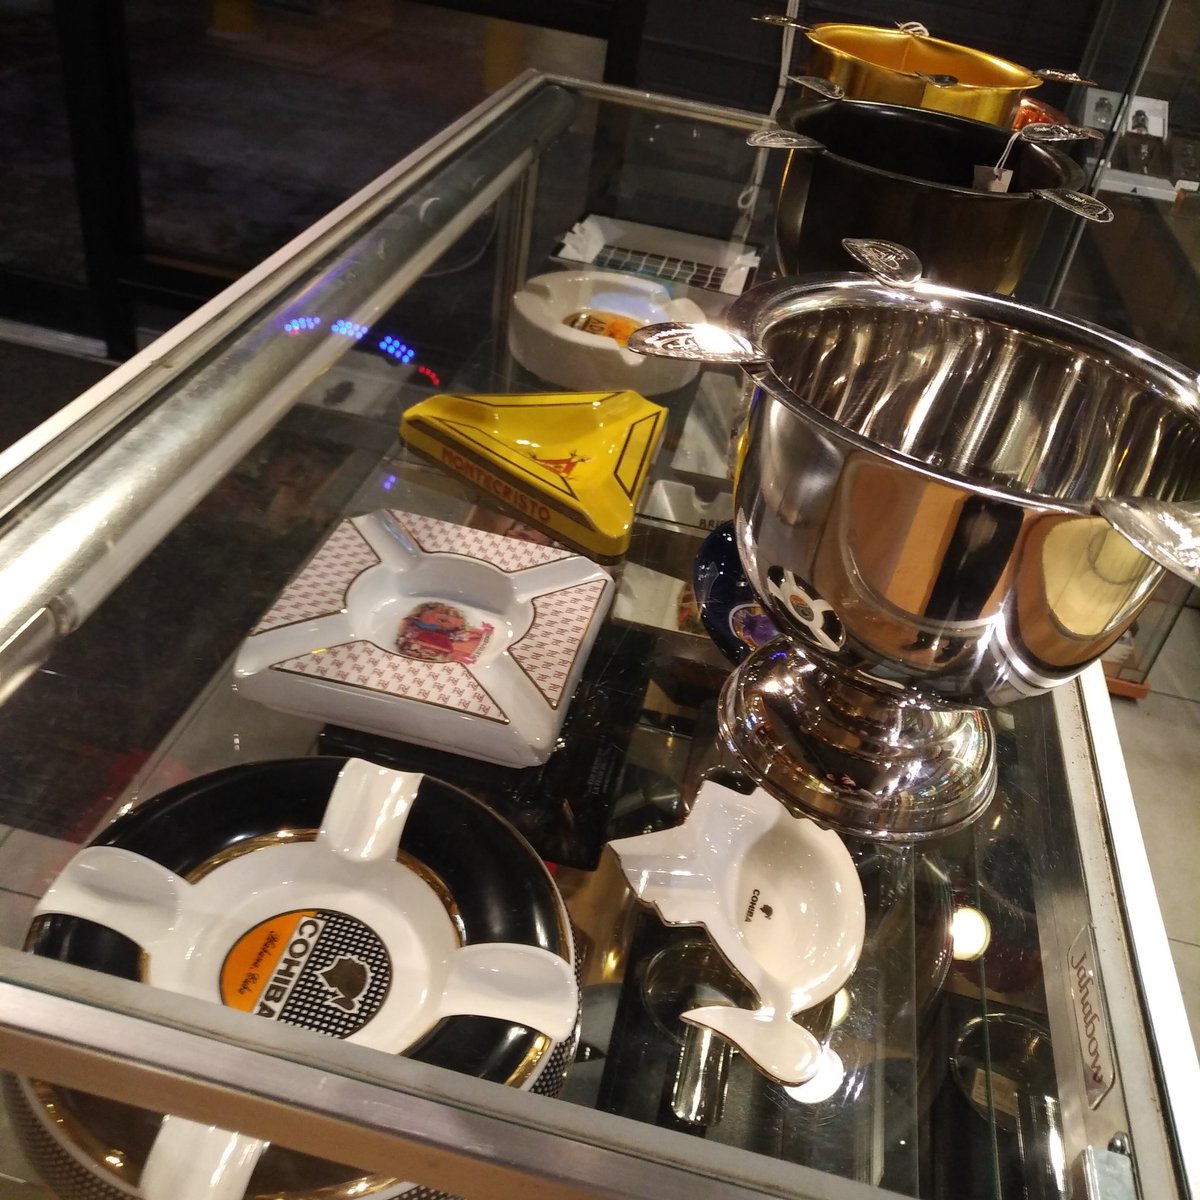 We have a great selection of cigar ashtrays in store. 

**must be 18+ to enter and purchase 
#cigarlife #cigaraccessories